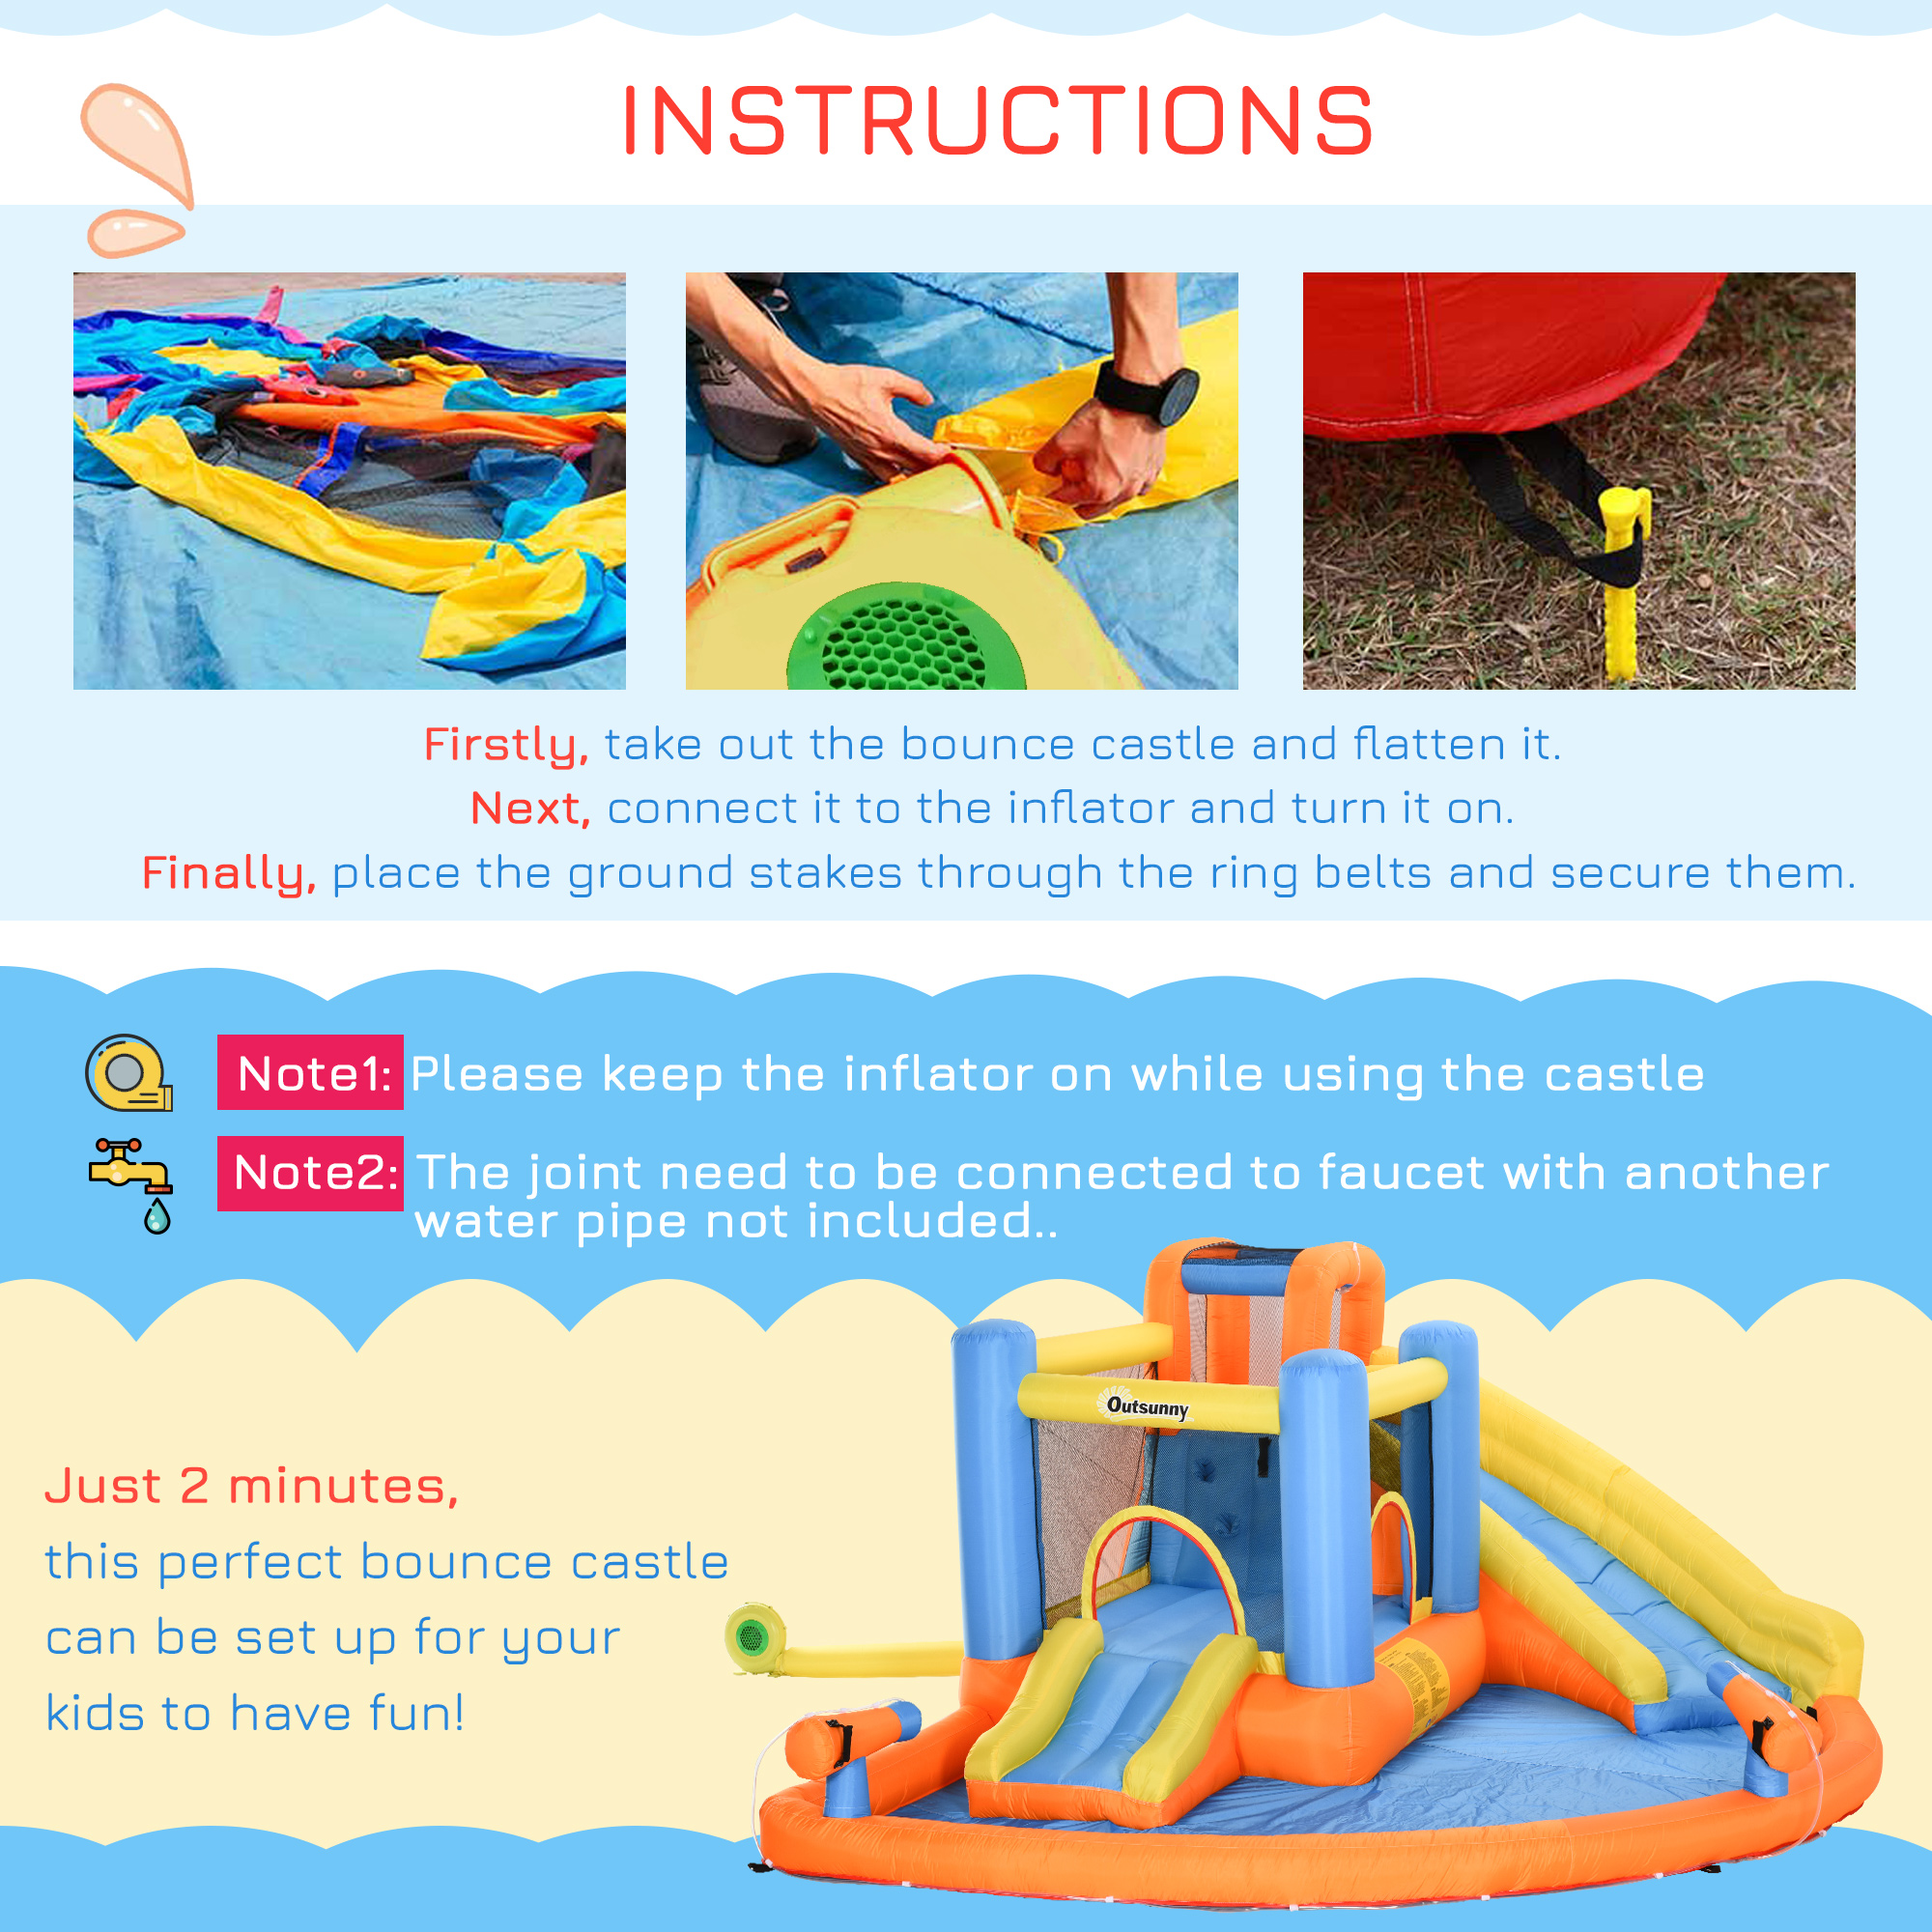 Outsunny Kids Inflatable Water Slide 5-in-1 Bounce House Water Park Jumping Castle with Water Pool, Slide, Climbing Walls, & 2 Water Cannons, 450W Air Blower - image 5 of 9